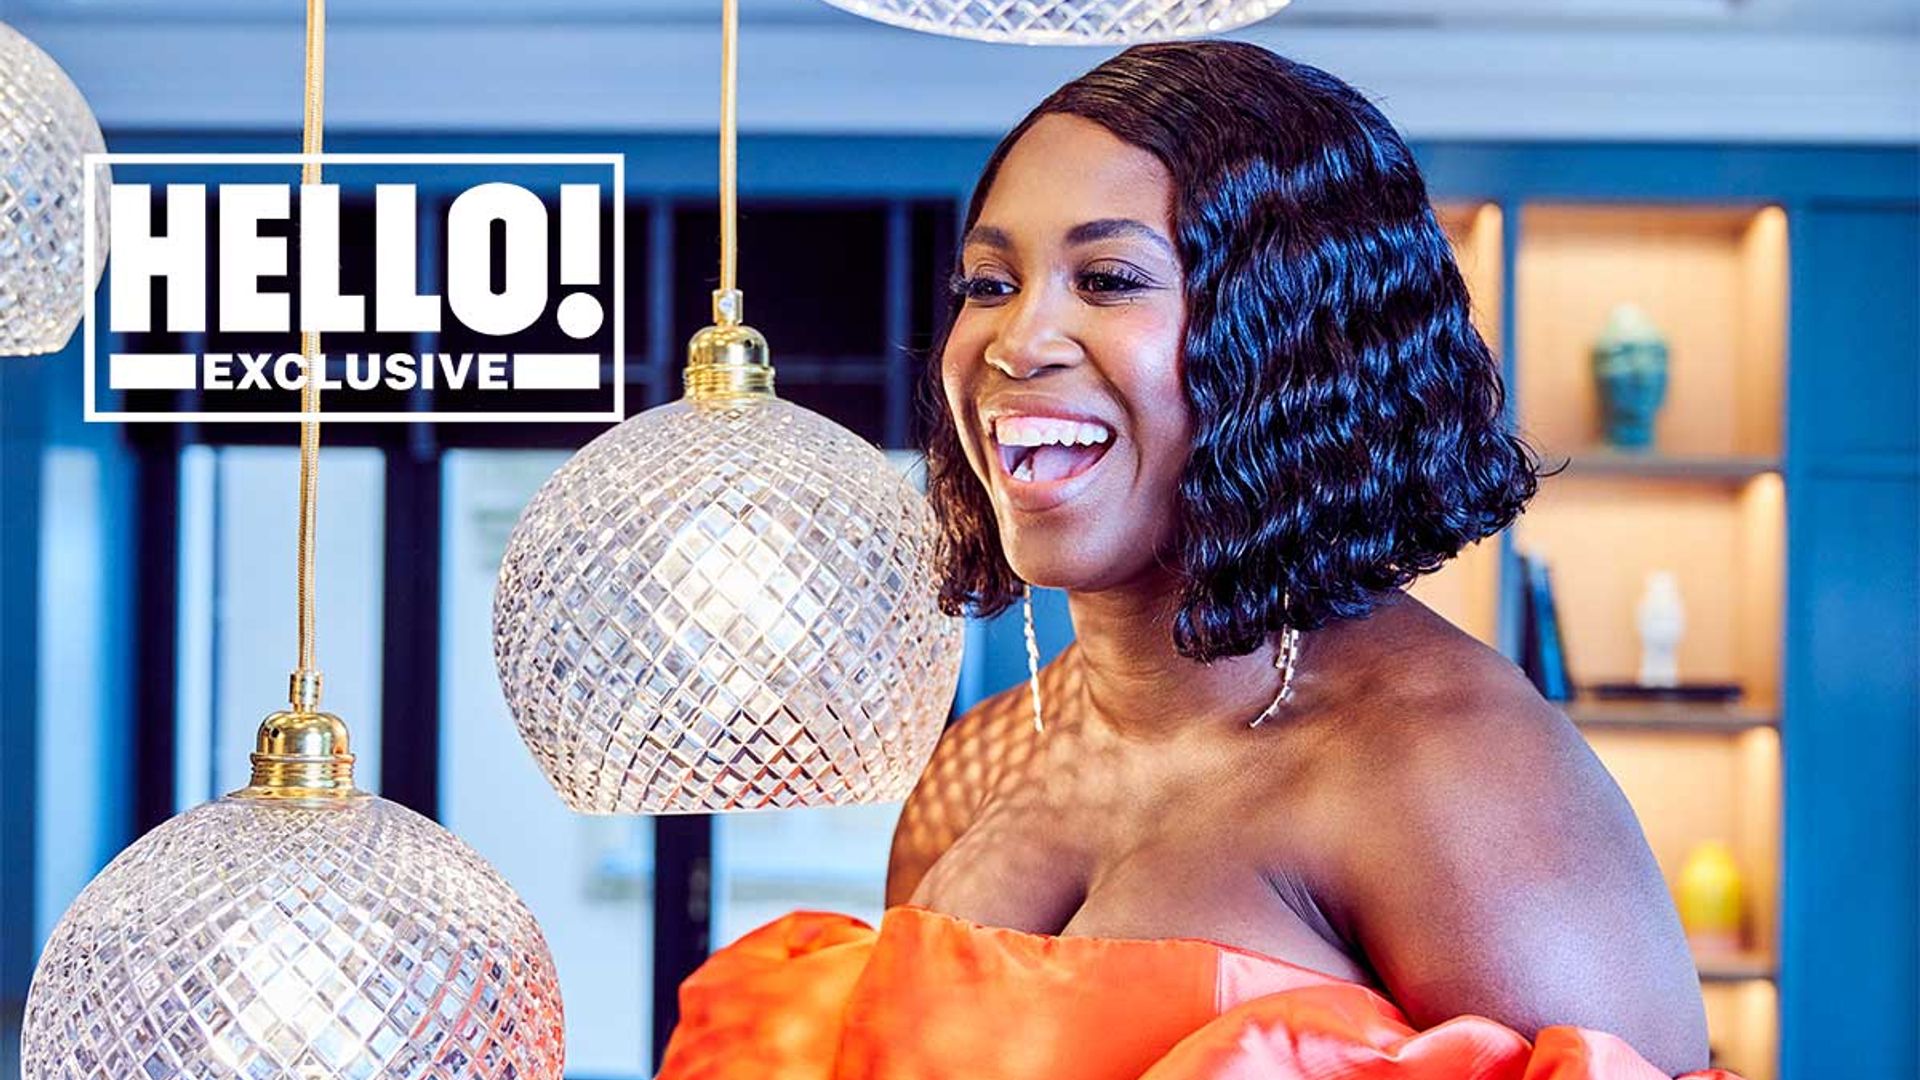 Exclusive: Strictly Come Dancing judge Motsi Mabuse shares excitement over show's return